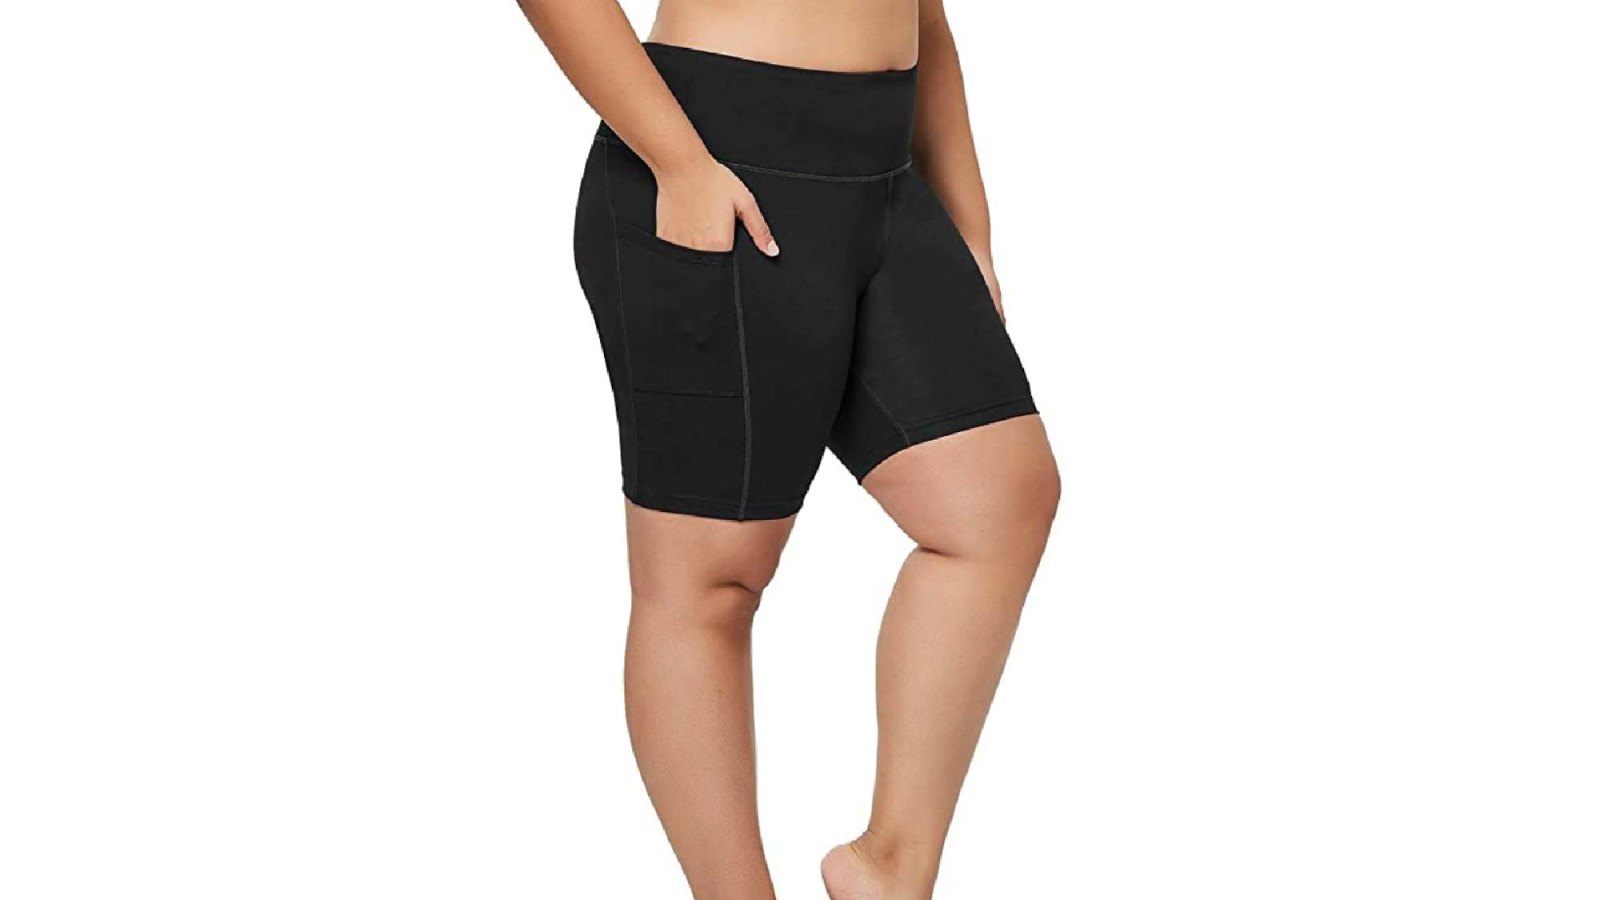 These Bestselling Workout Shorts Come in a Wide Range of Sizes | UsWeekly